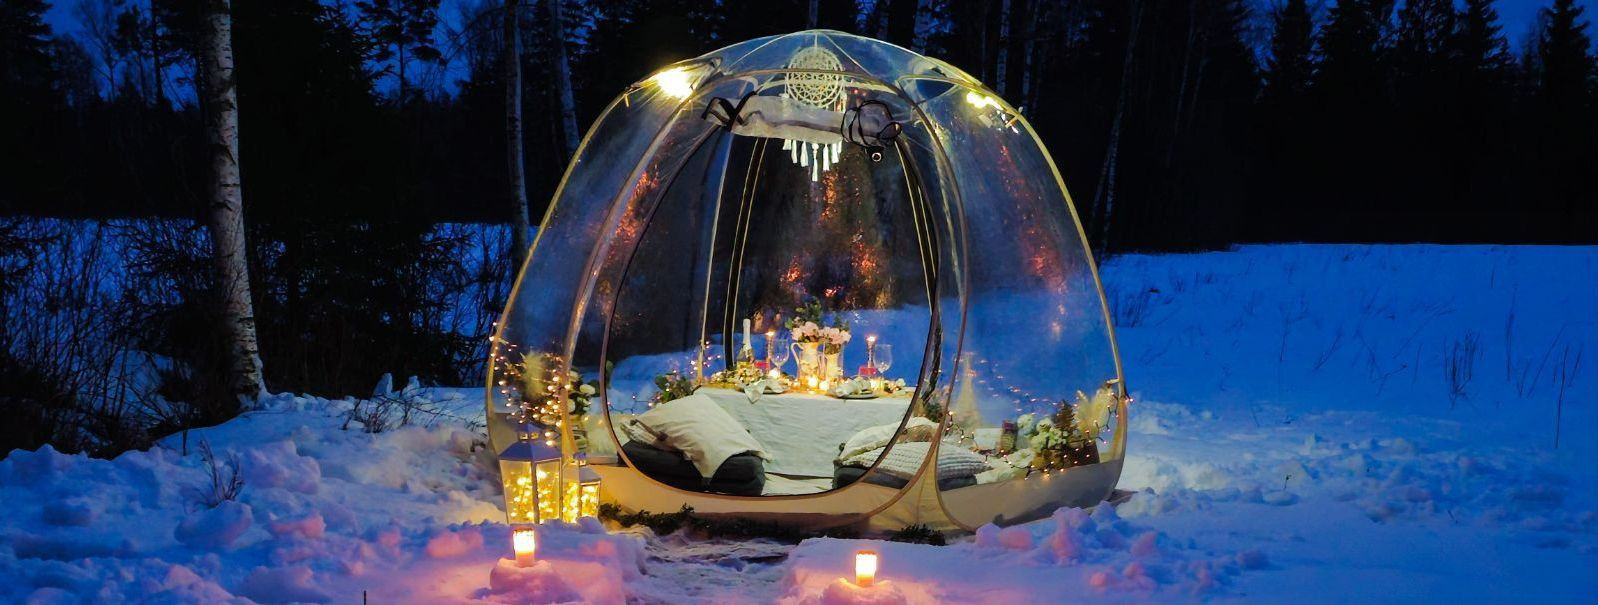 Bubble tents are a revolutionary form of accommodation that combines ...